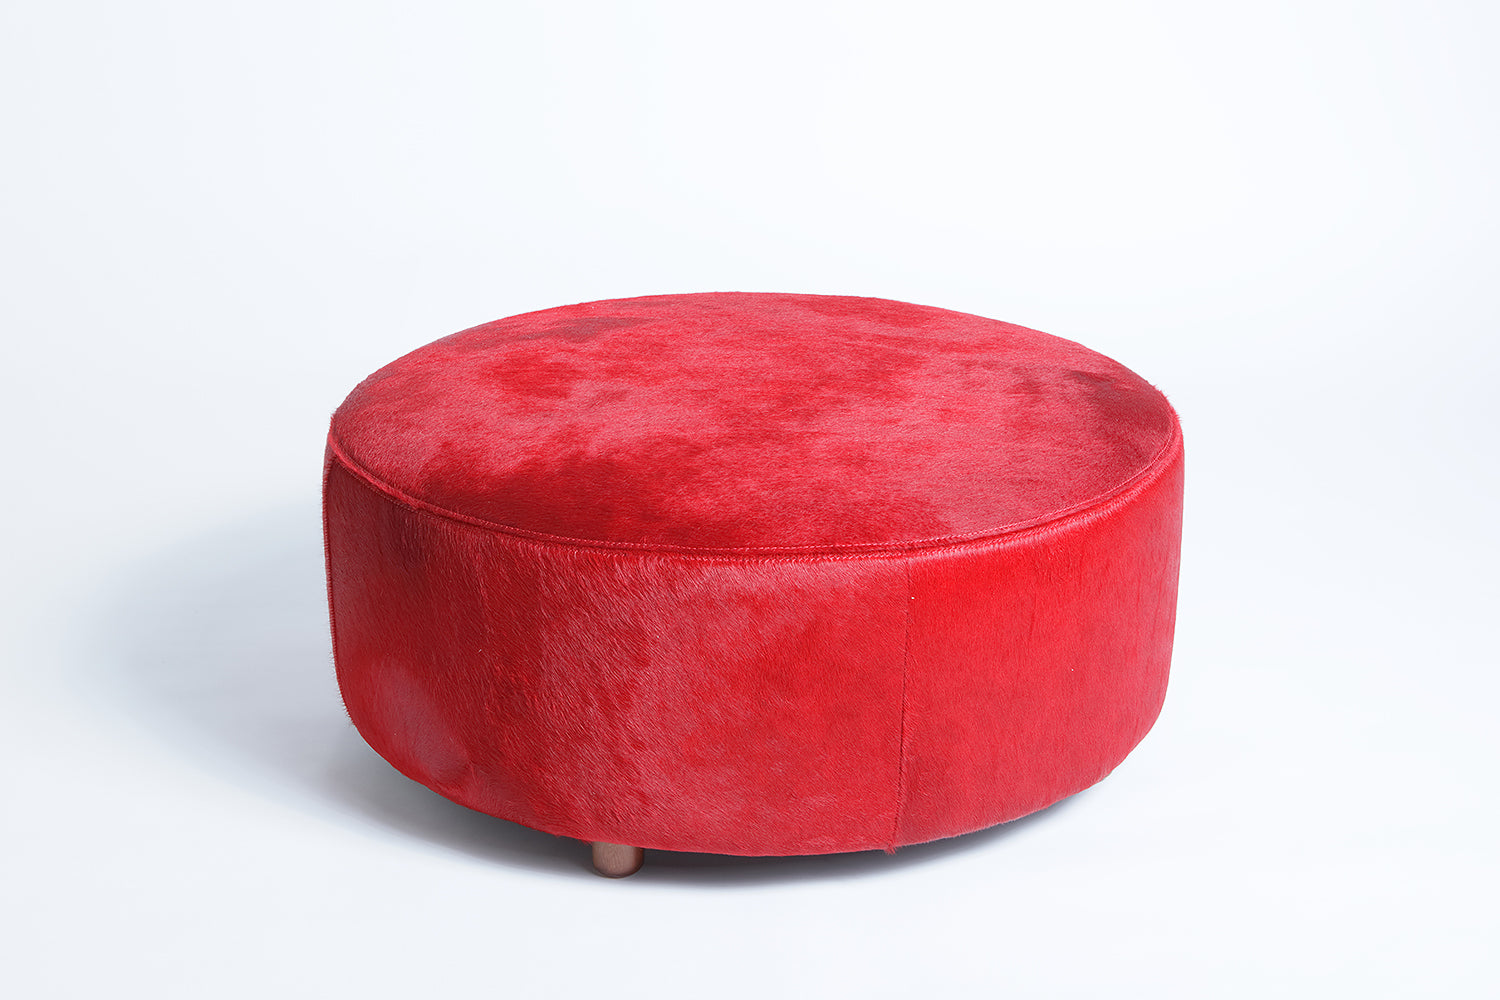 Spiller skak defile Bulk RED - Round Cowhide Ottoman, Stool, Pouf, Coffee Table – Homelosophy